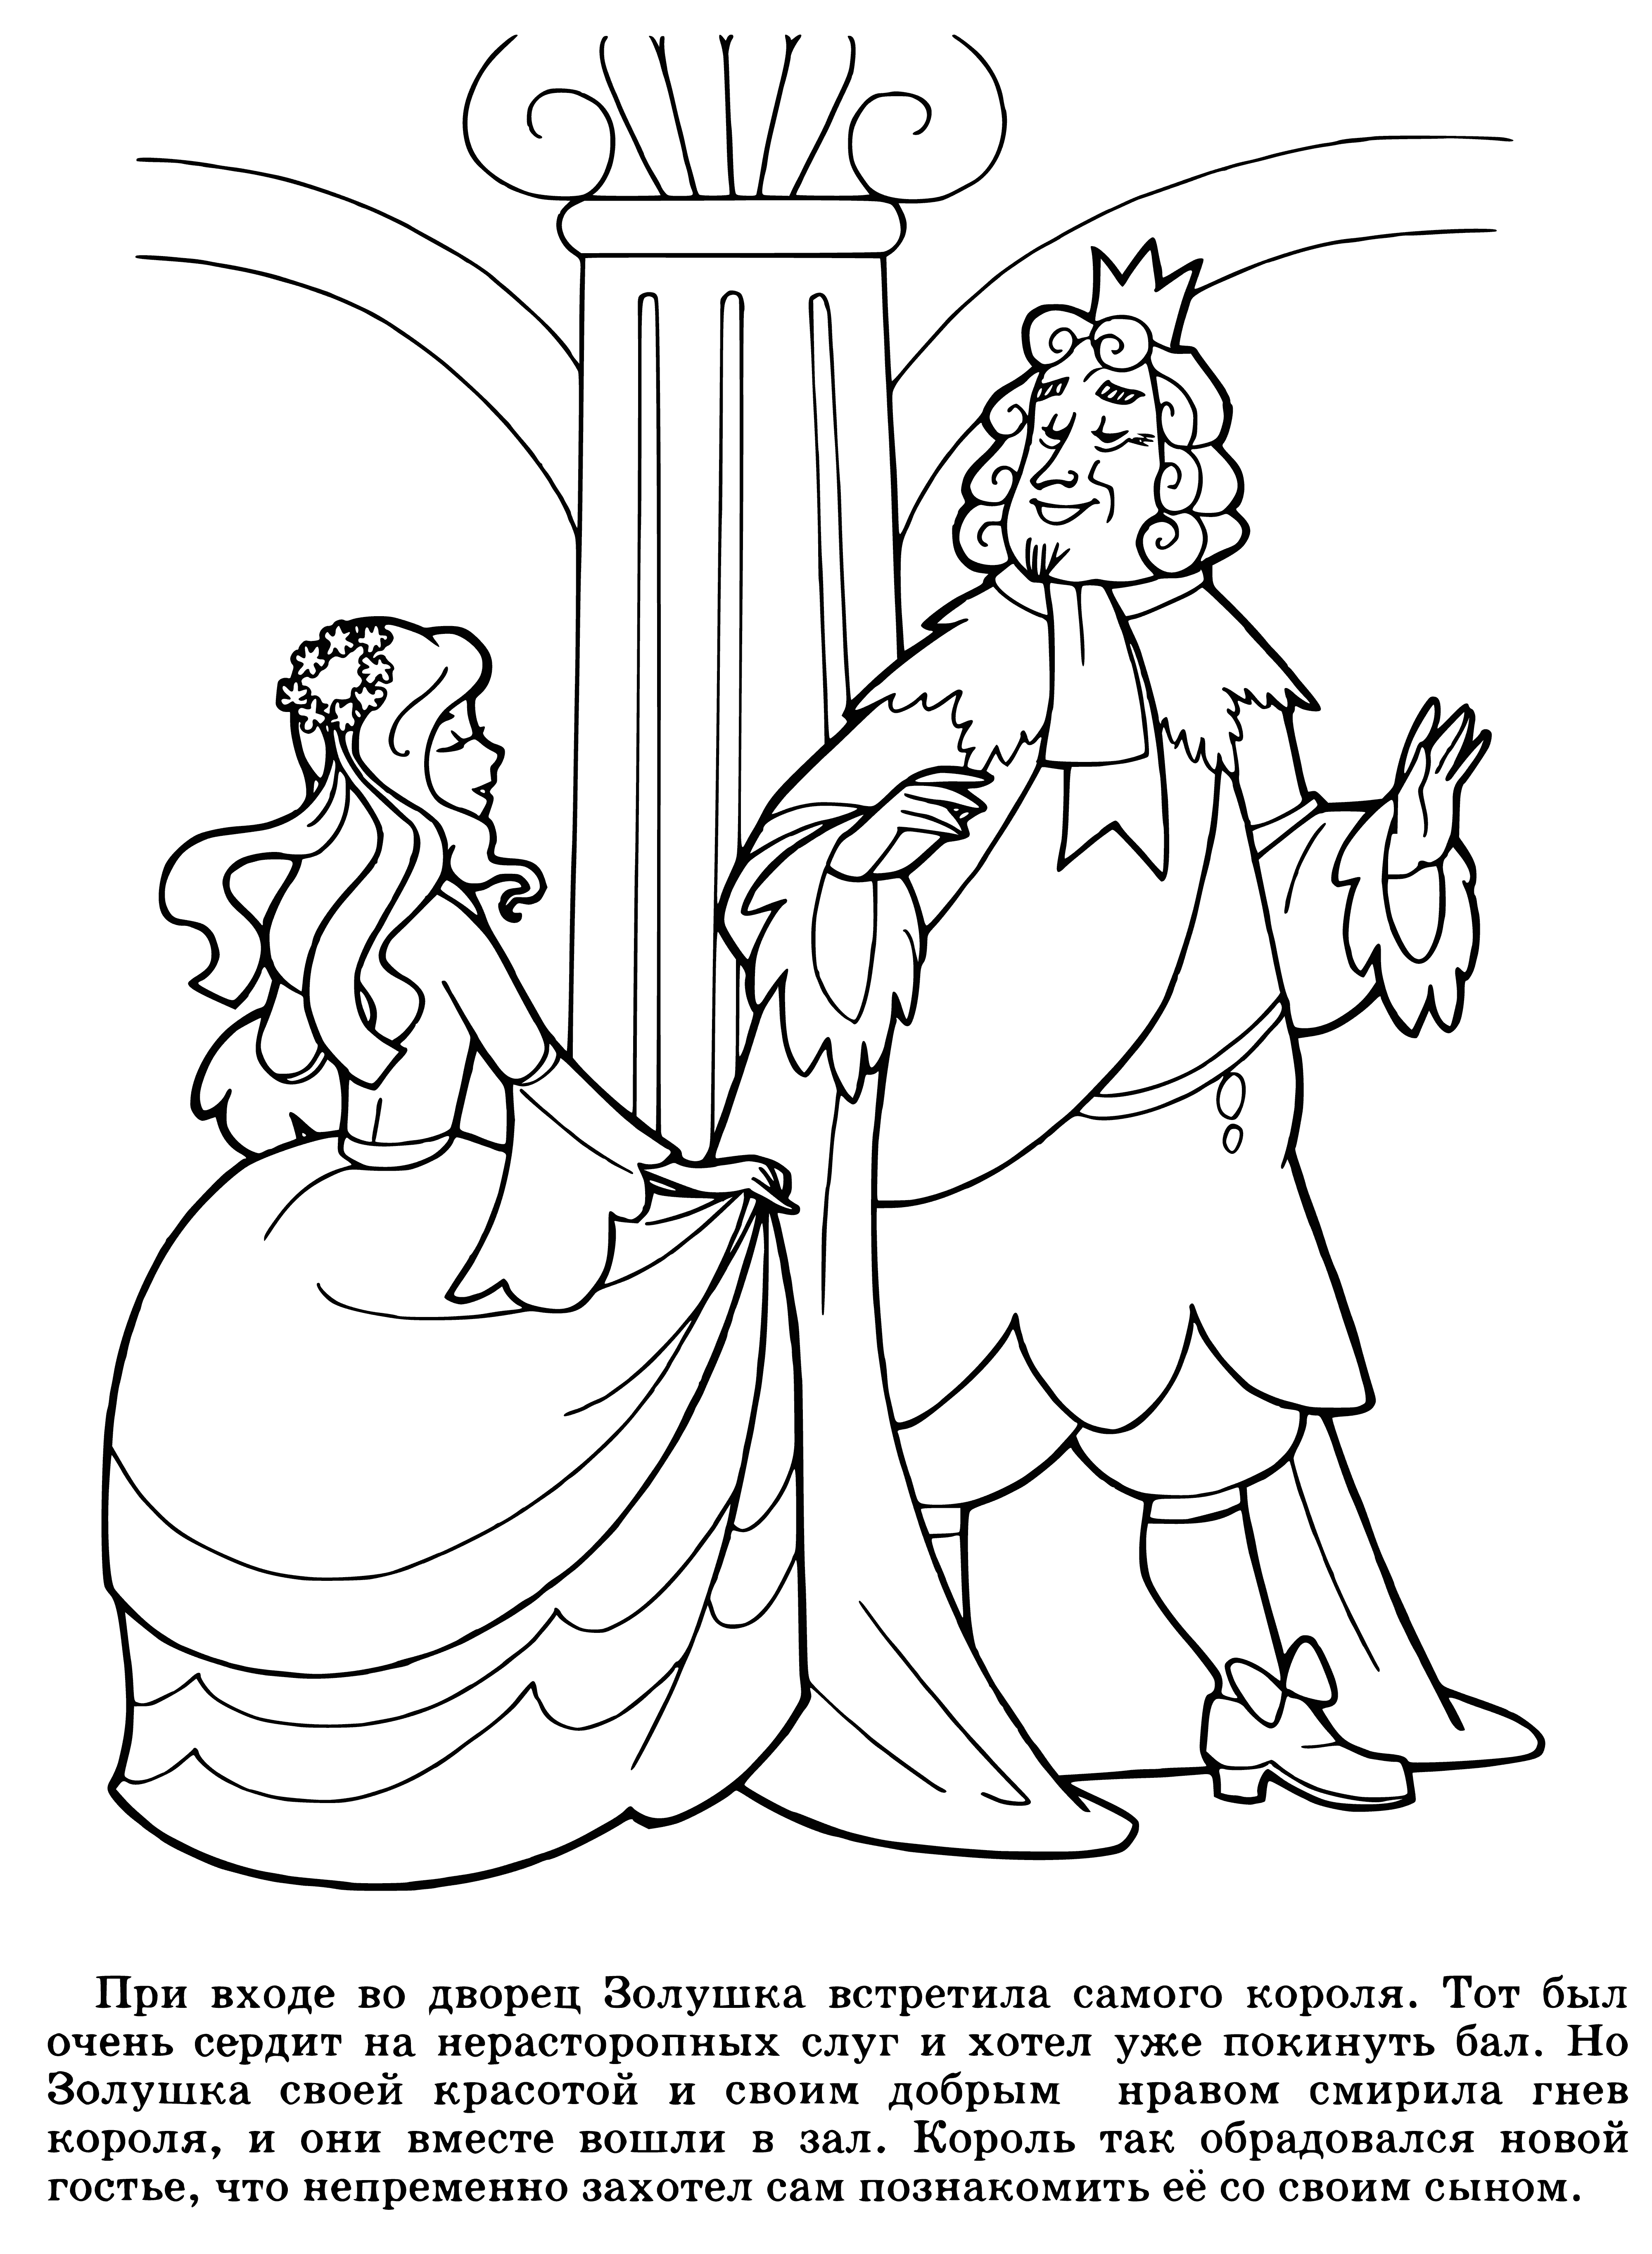 The king is fascinated coloring page